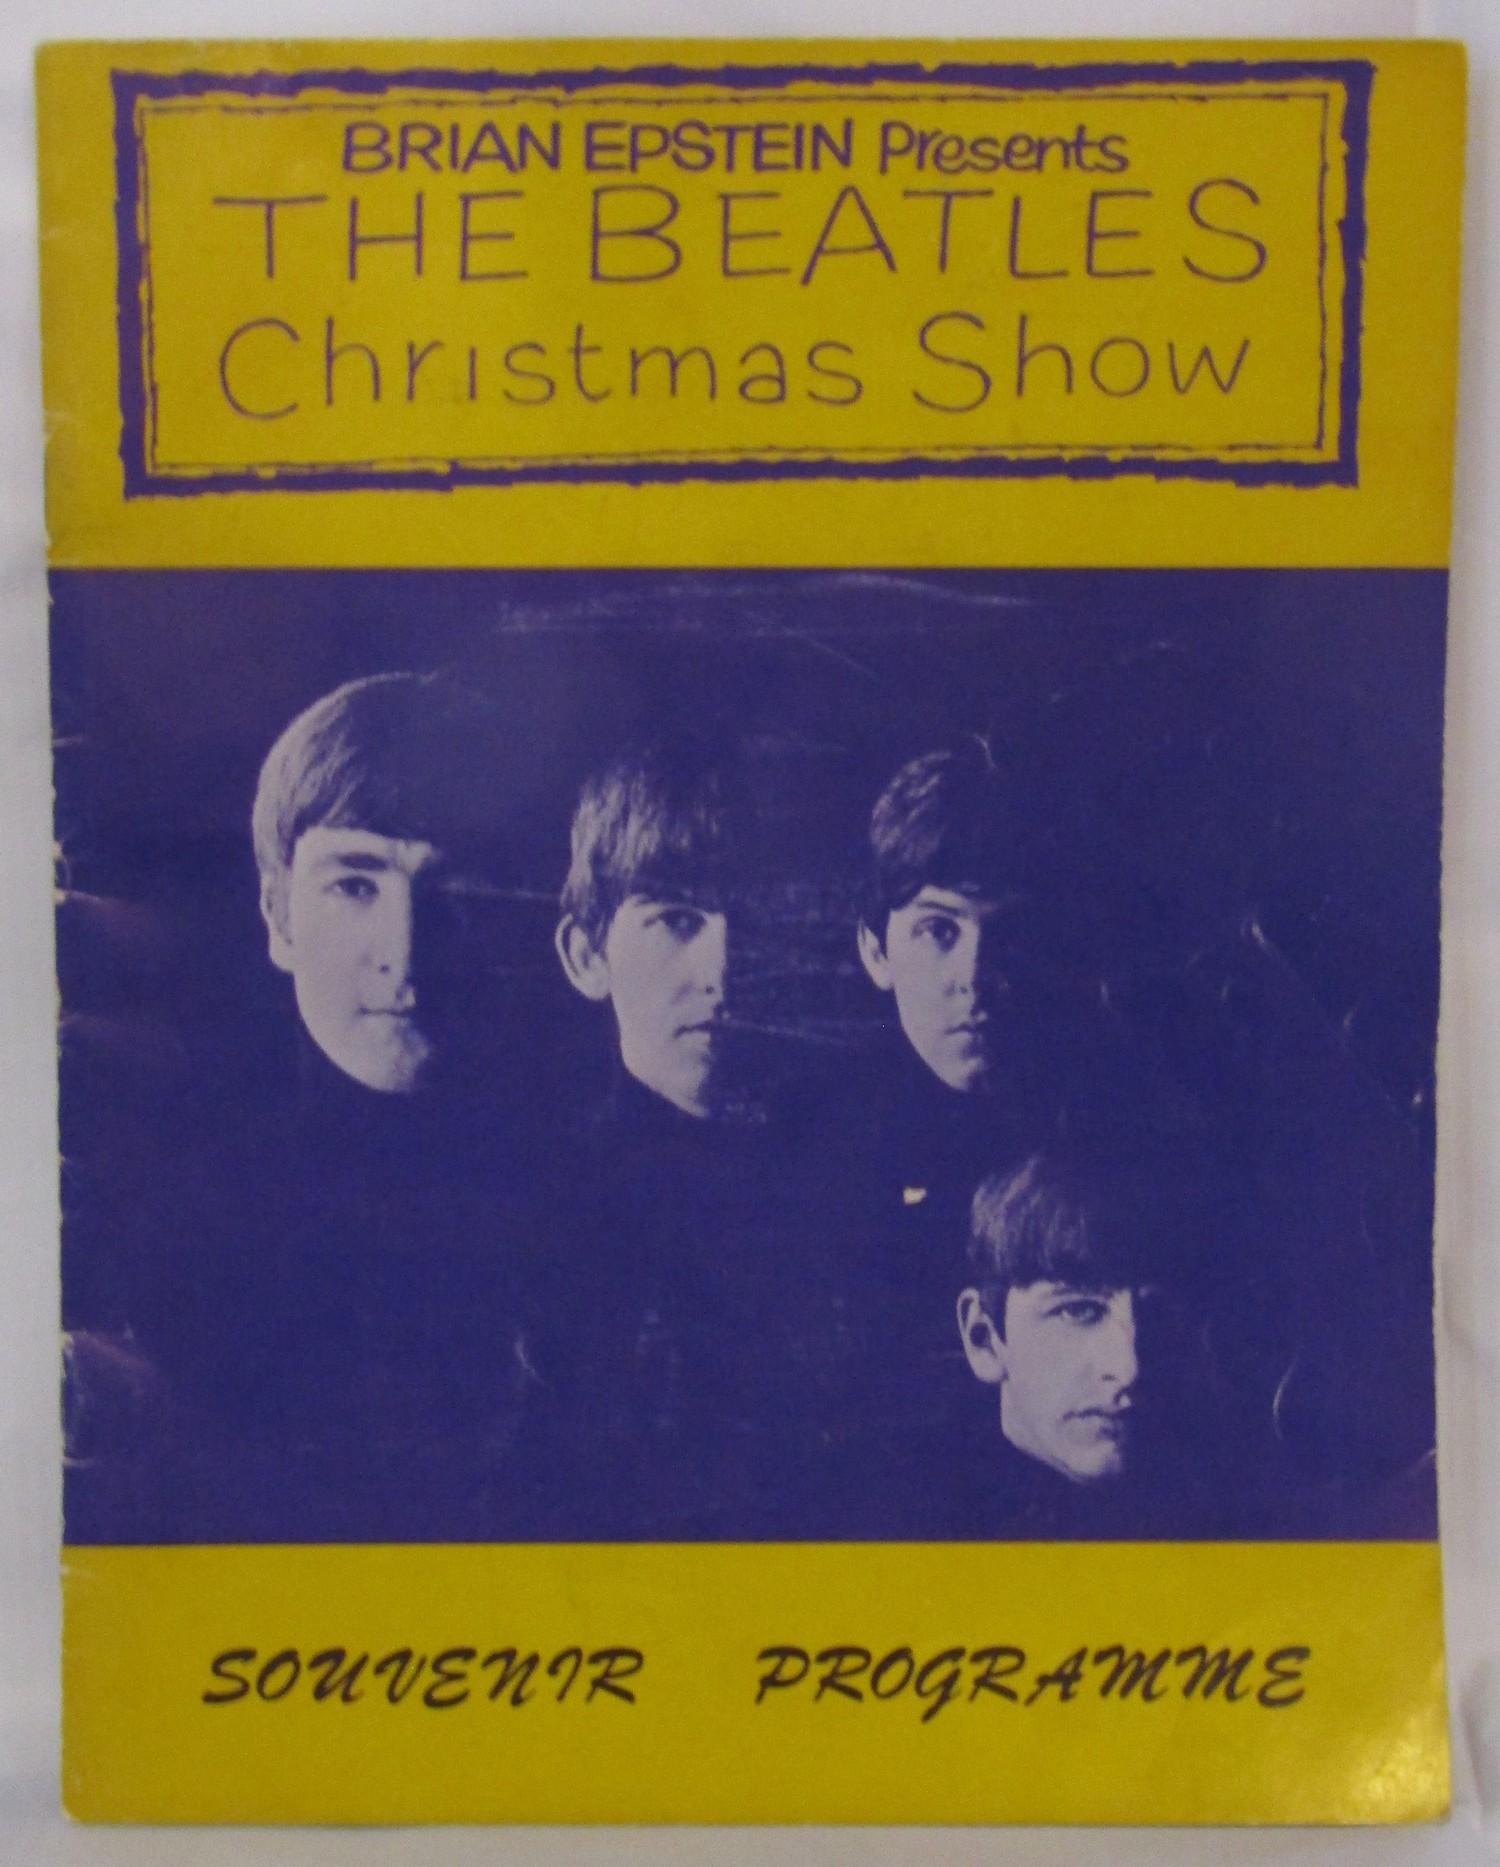 The Beatles Christmas Show programme which ran from 24th December 1963 to 11th January 1964 at the